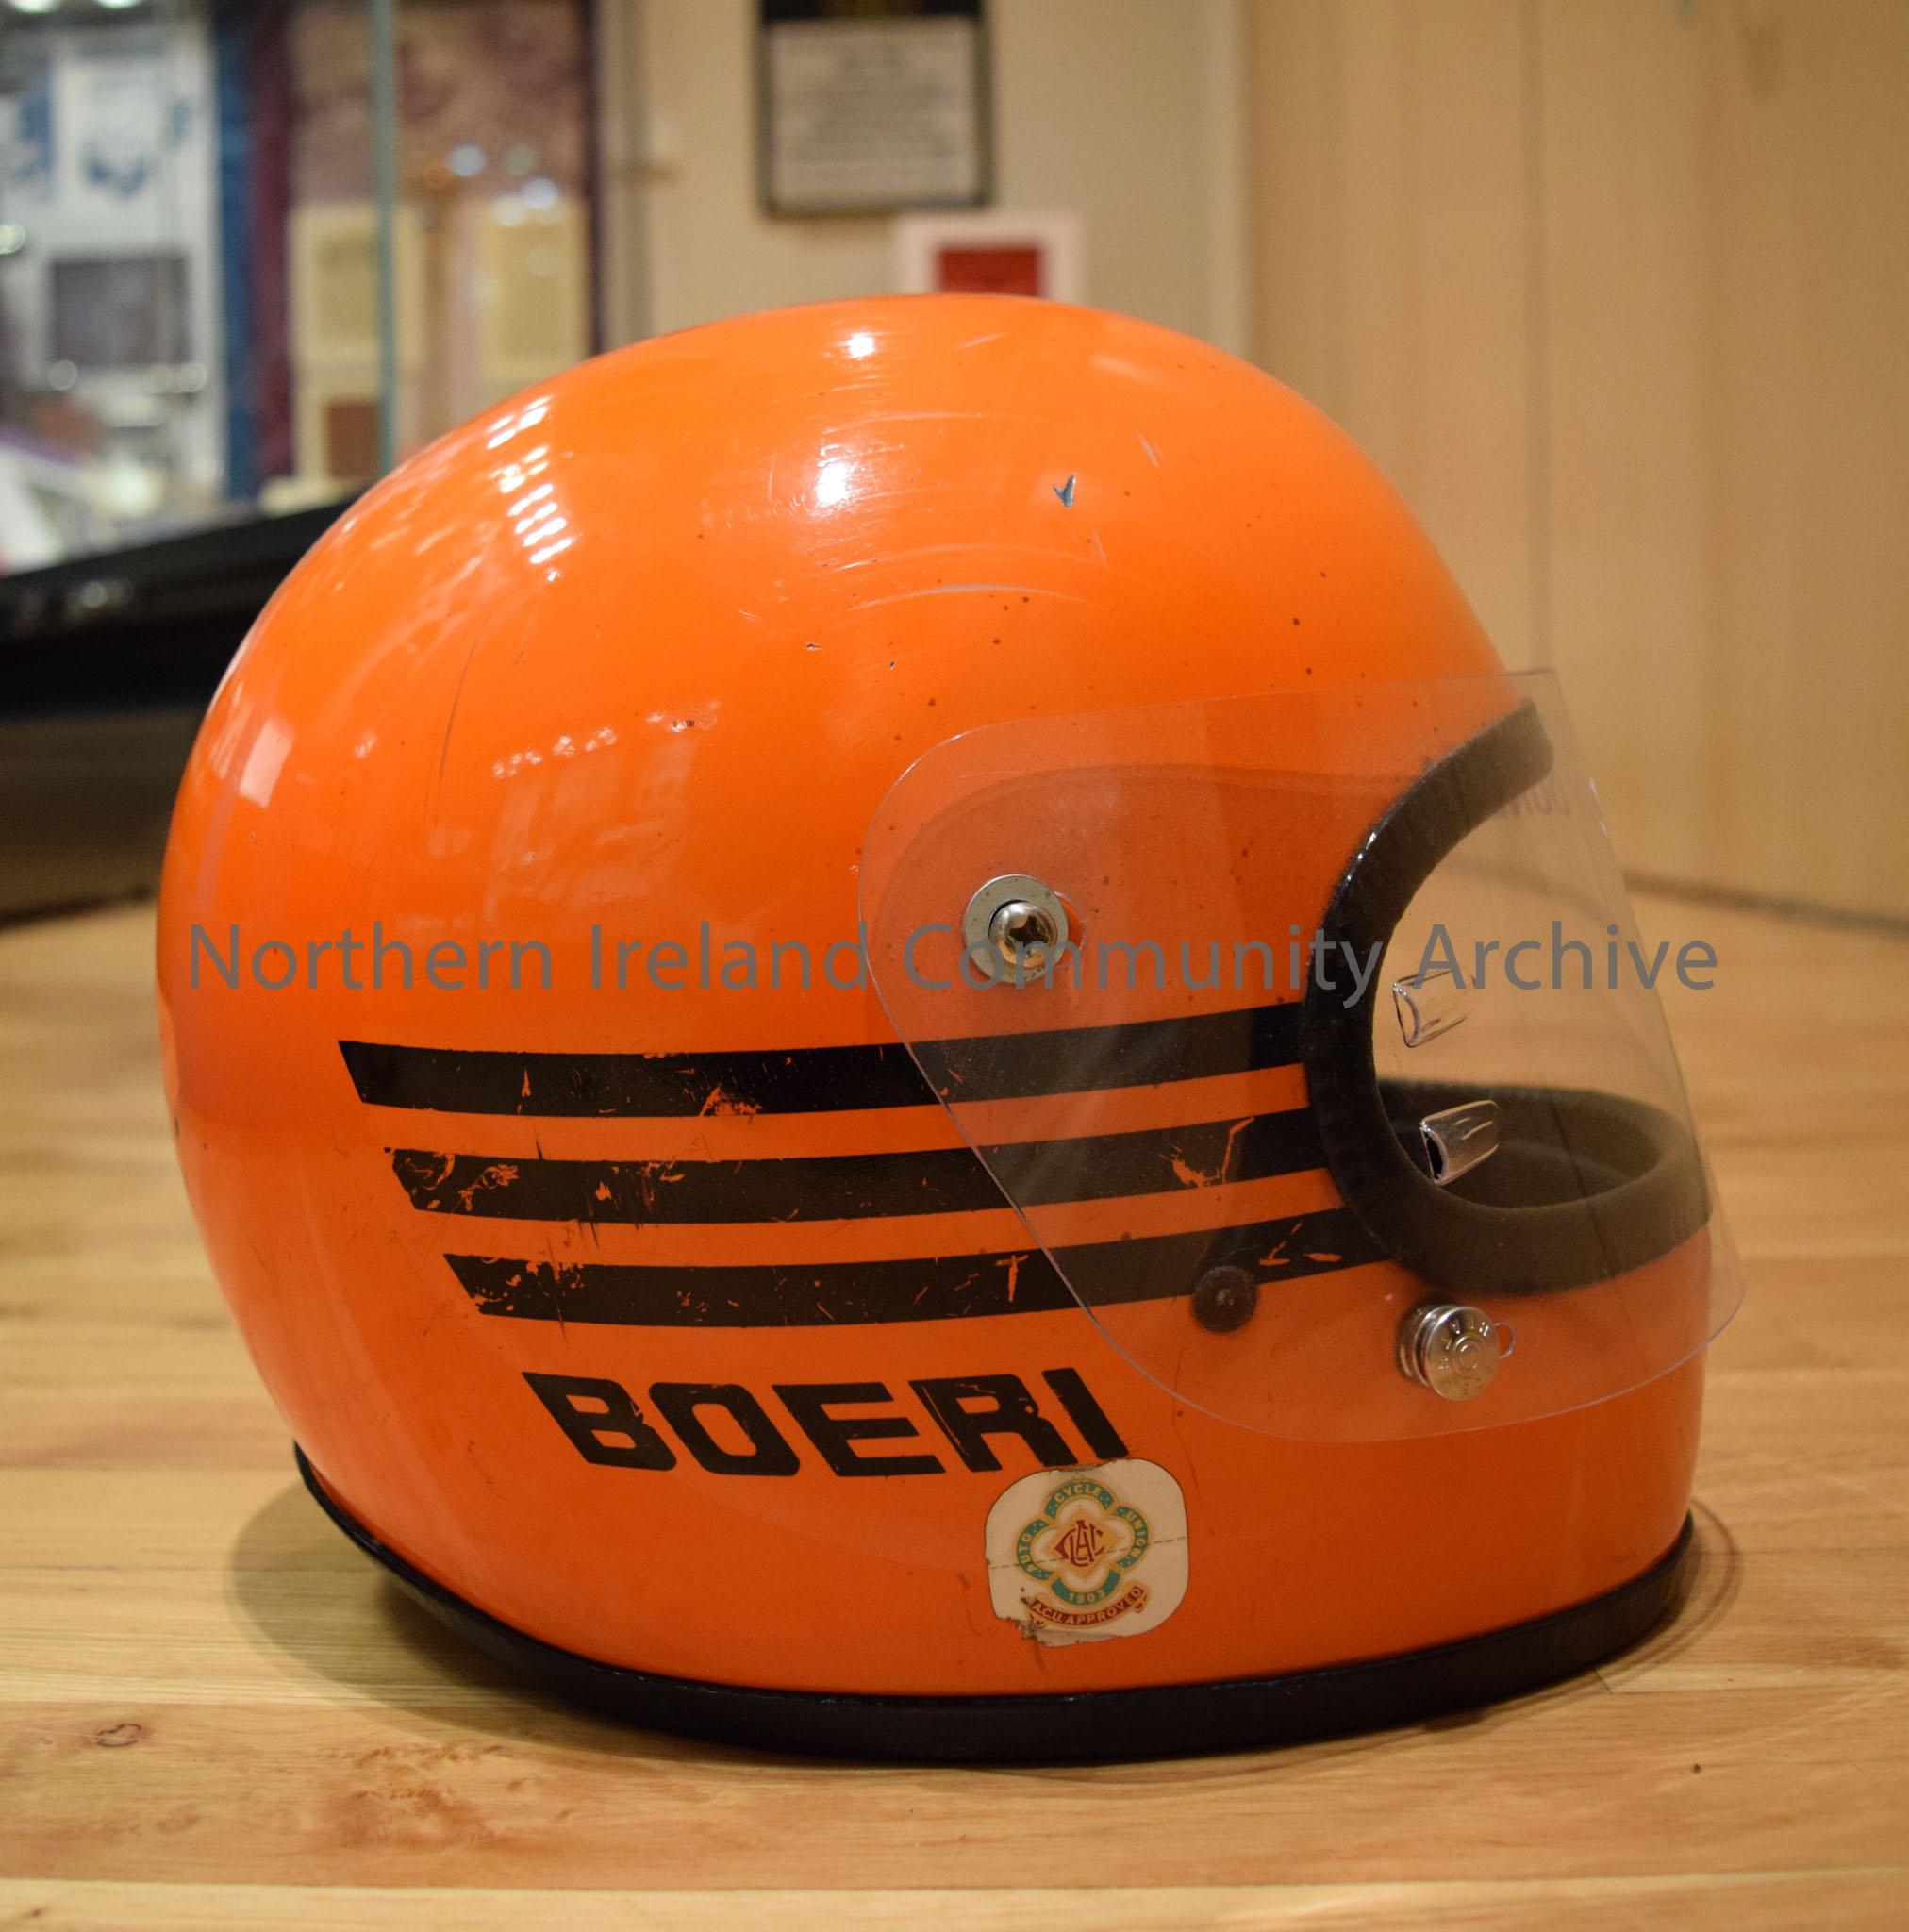 Boeri motorcycle helmet belonging to Joey Dunlop. Orange with a single black running over the top and three black stripes on either side. – 2016.107 (5)